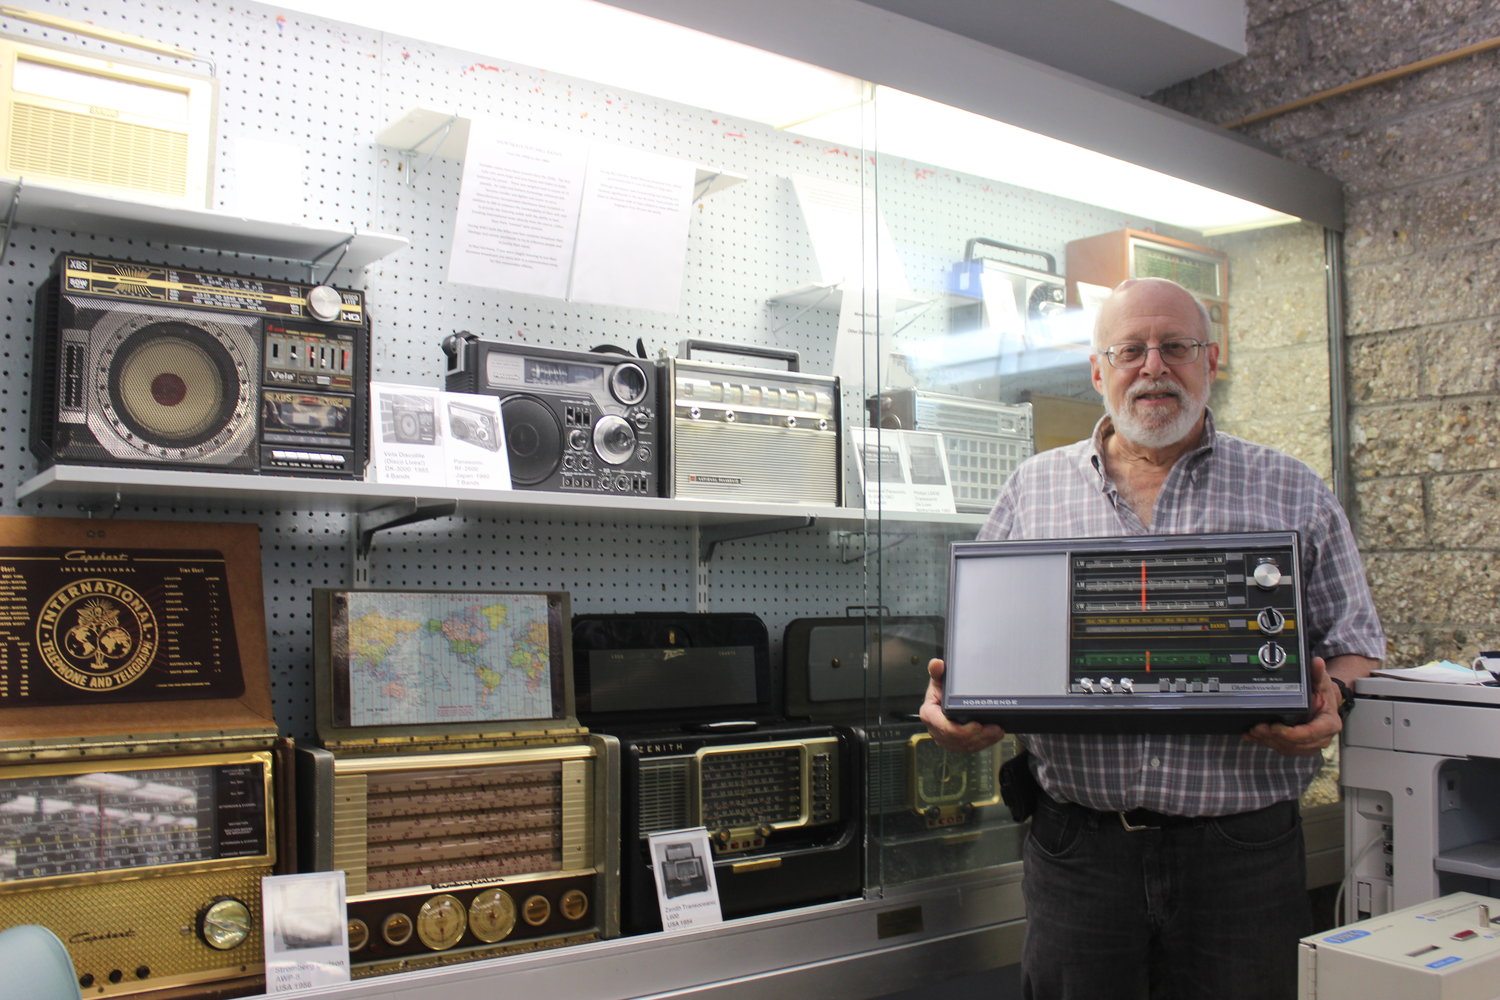 Michael Katz, 69, of Seaford, is a vintage radio collector who has part of his collection on display at the Wantagh Public Library until Saturday.